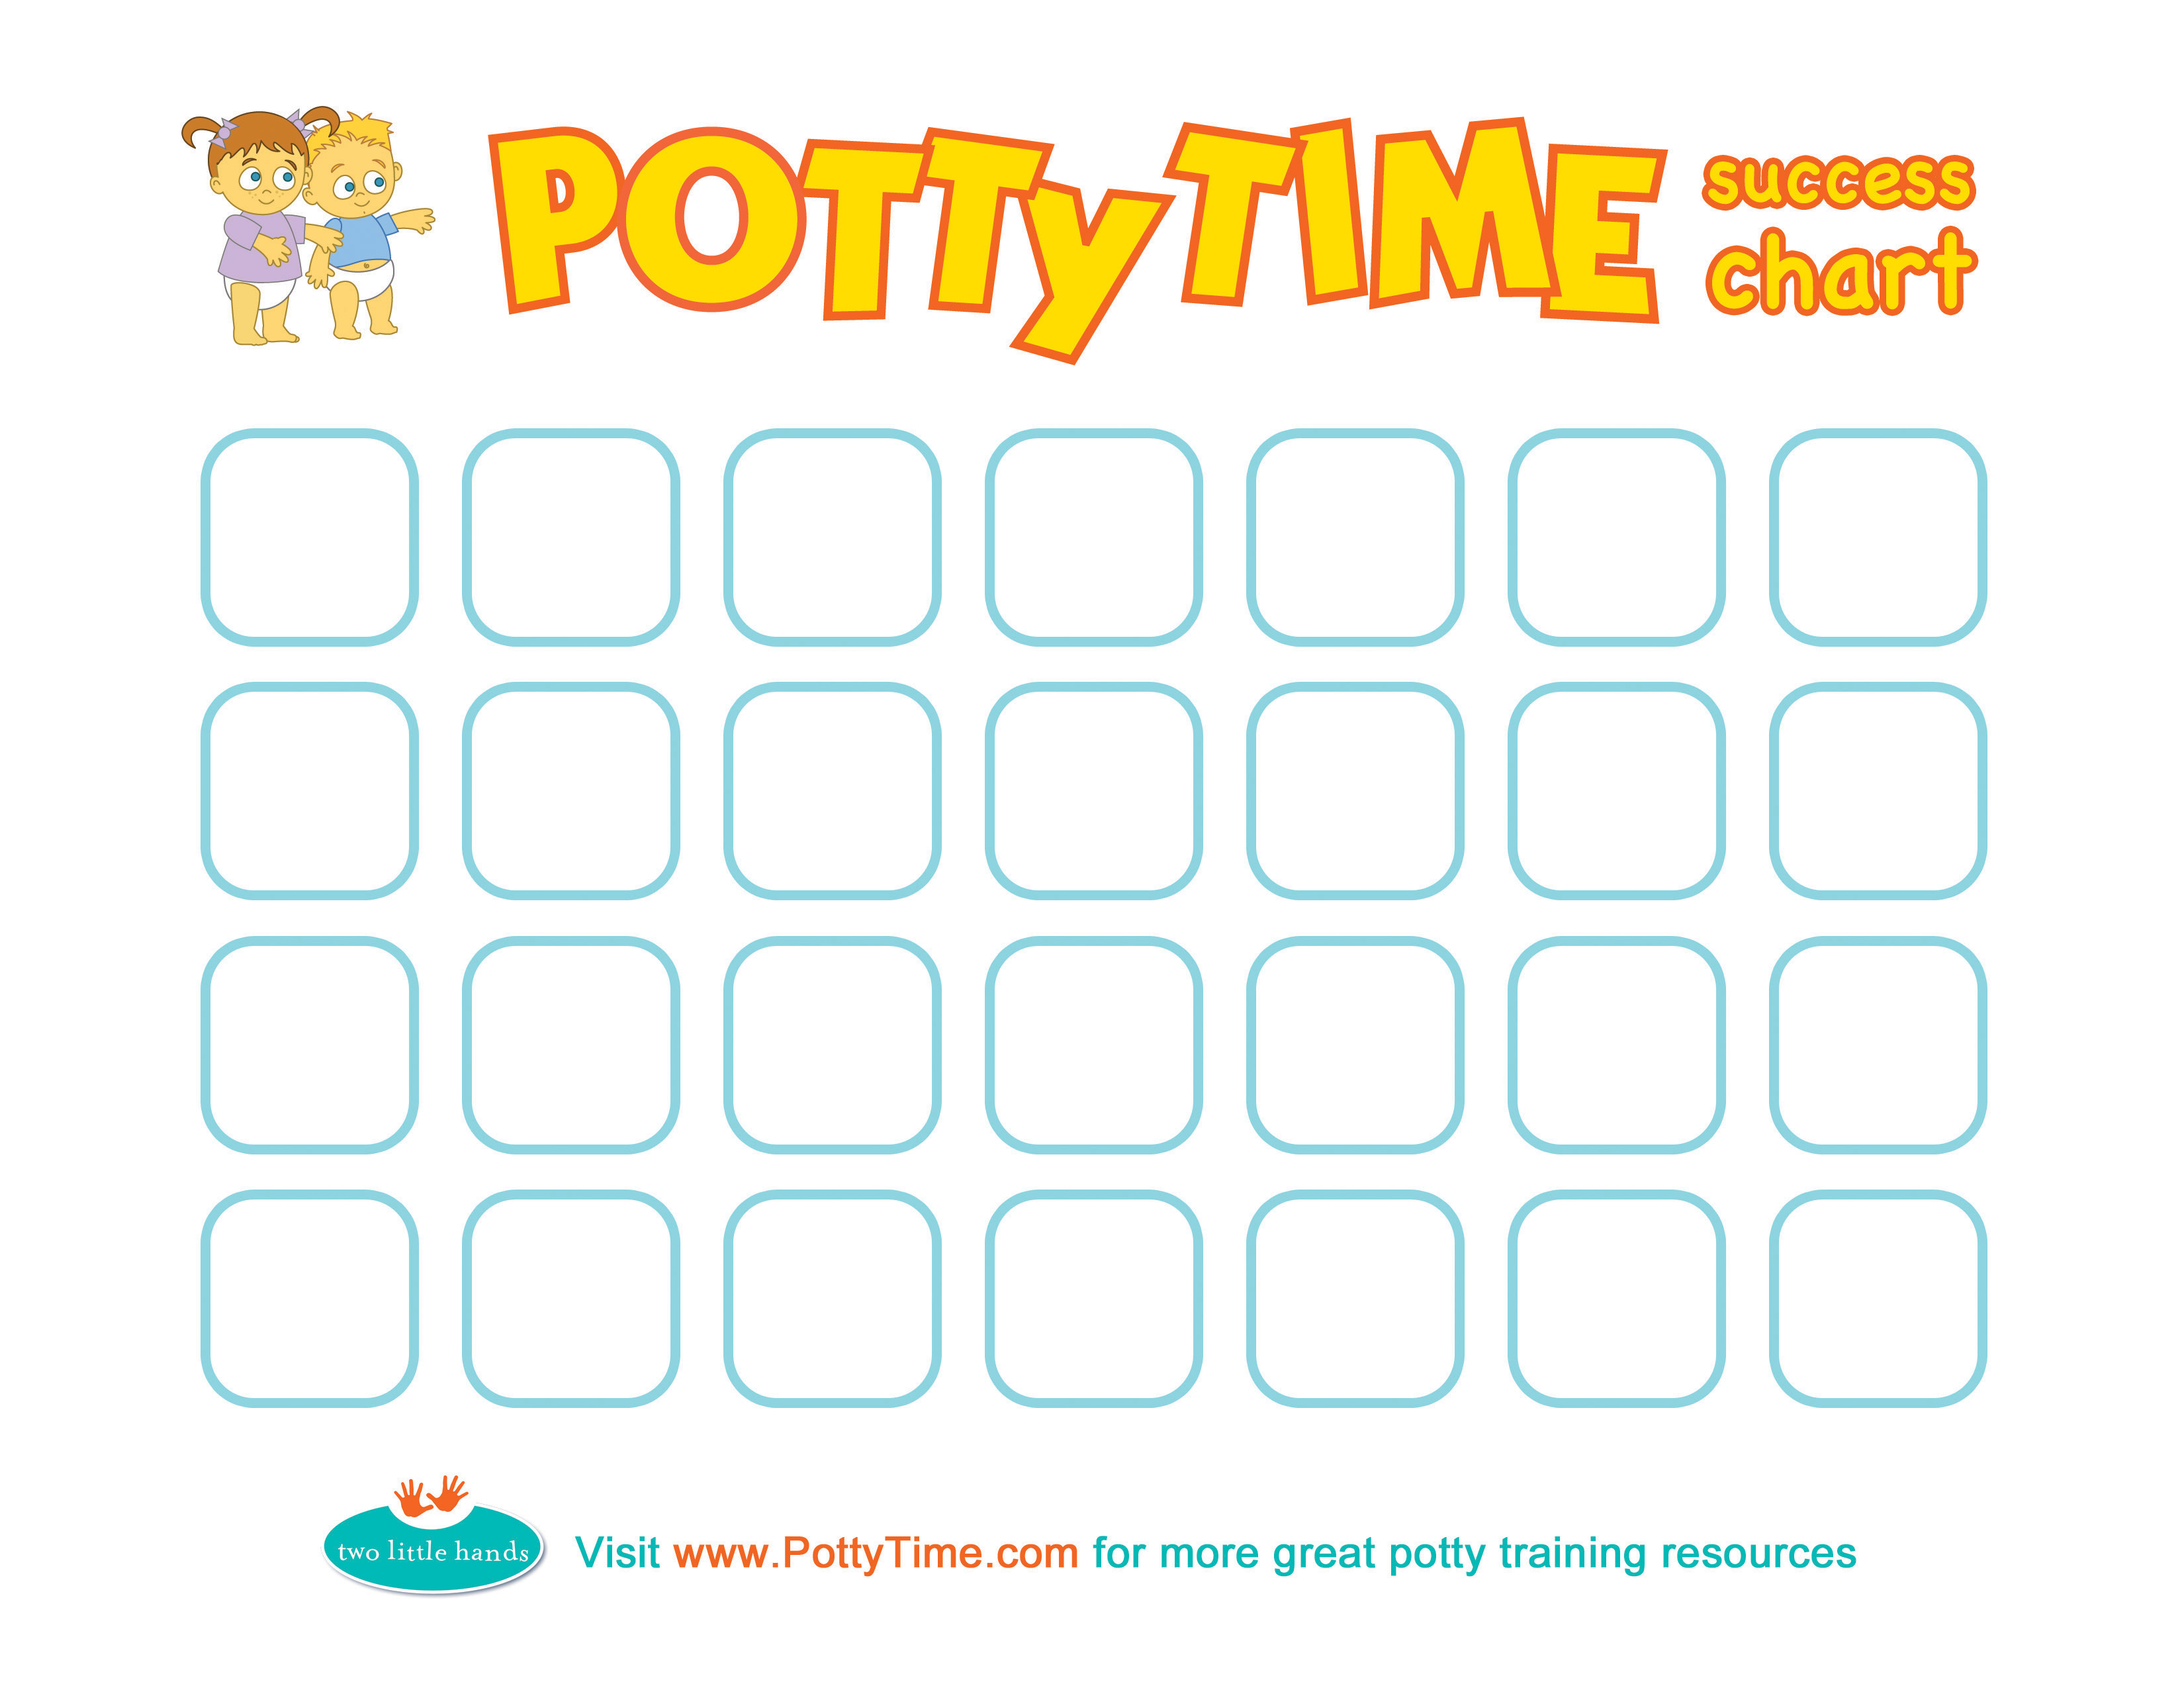 free-friday-potty-time-success-chart-signing-time